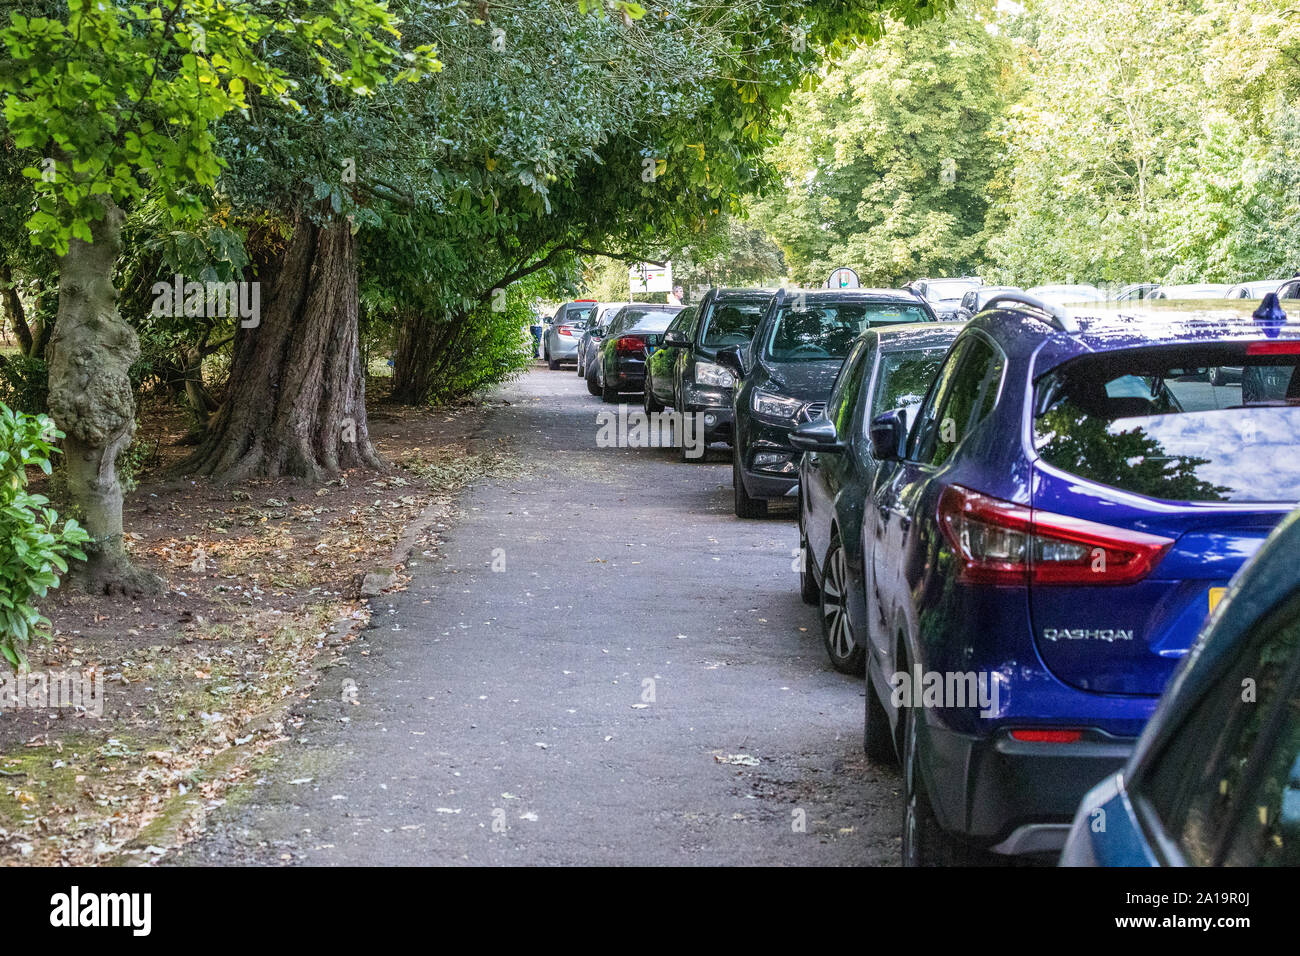 Cars parked on pavement obstructing pedestrian access and wheelchair access Stock Photo